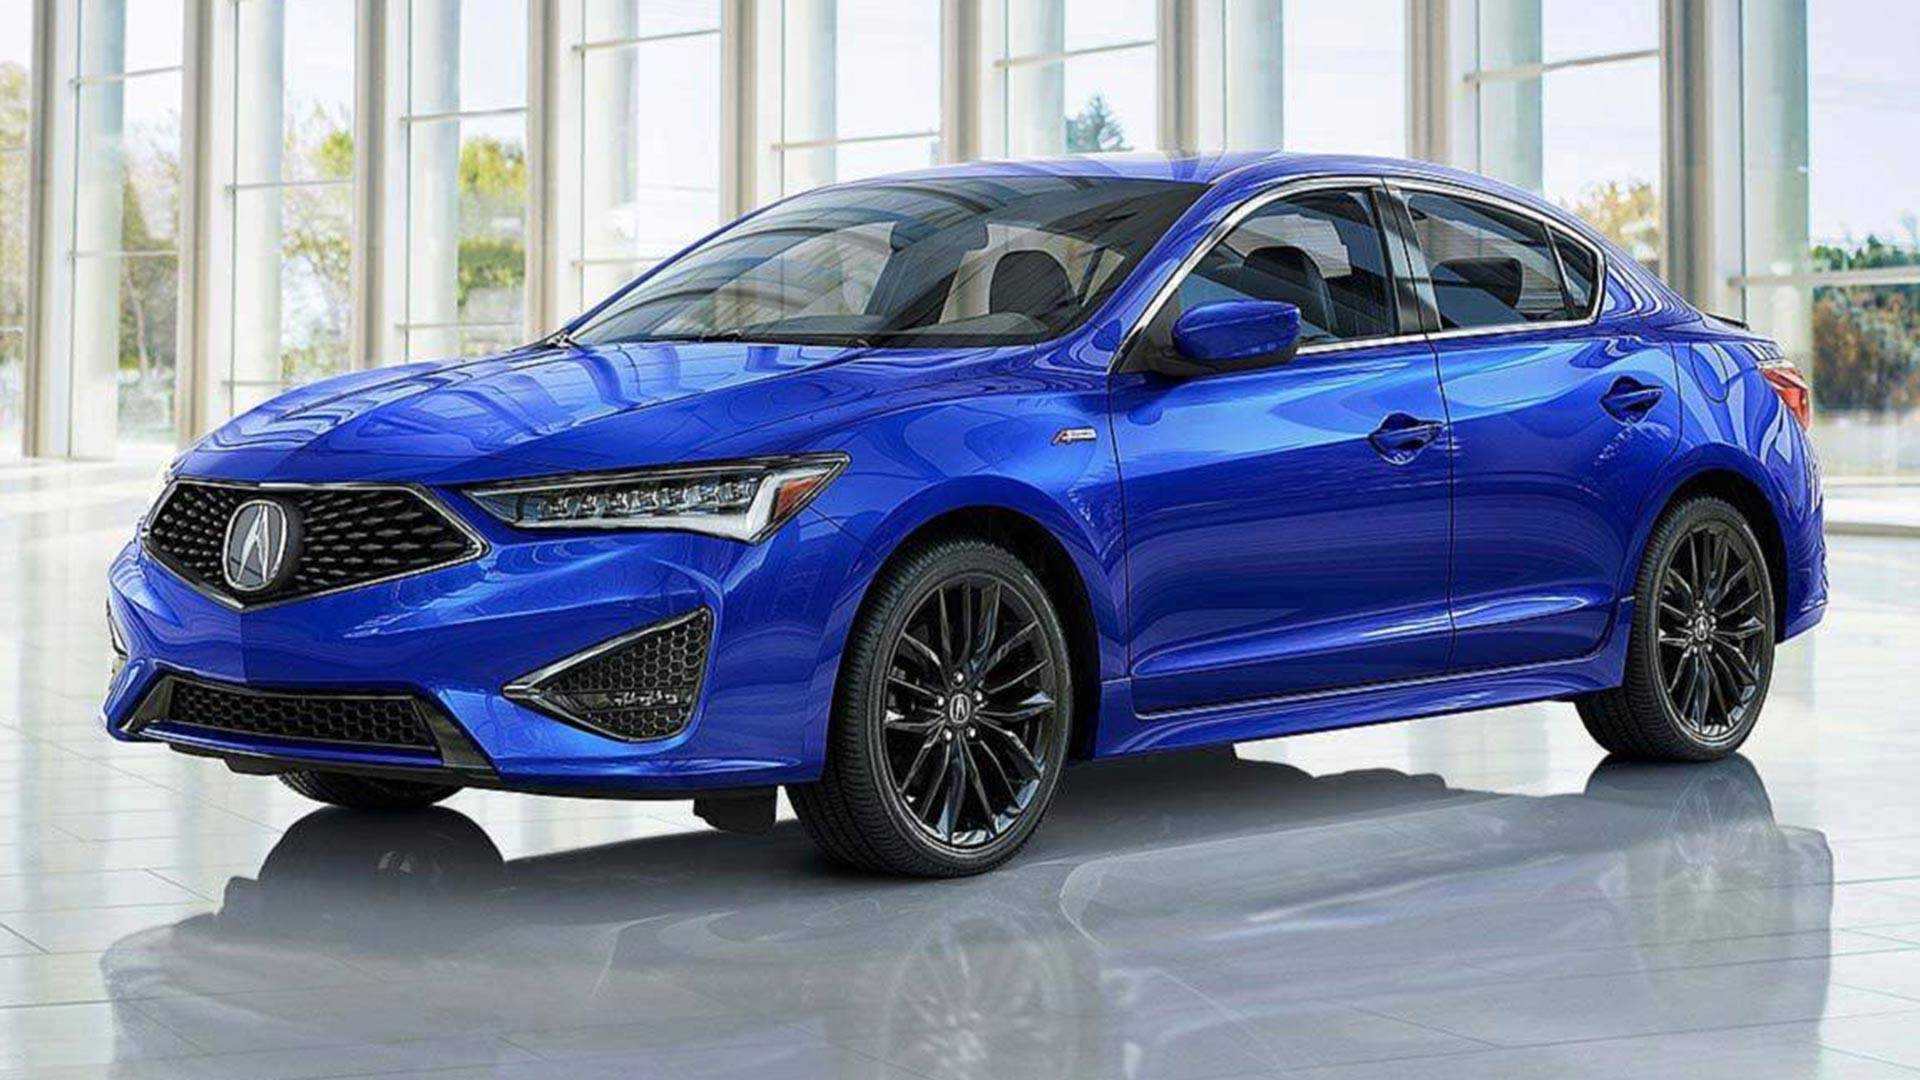 2019 Acura ILX Starts At $25,900 With Lots More Standard Tech